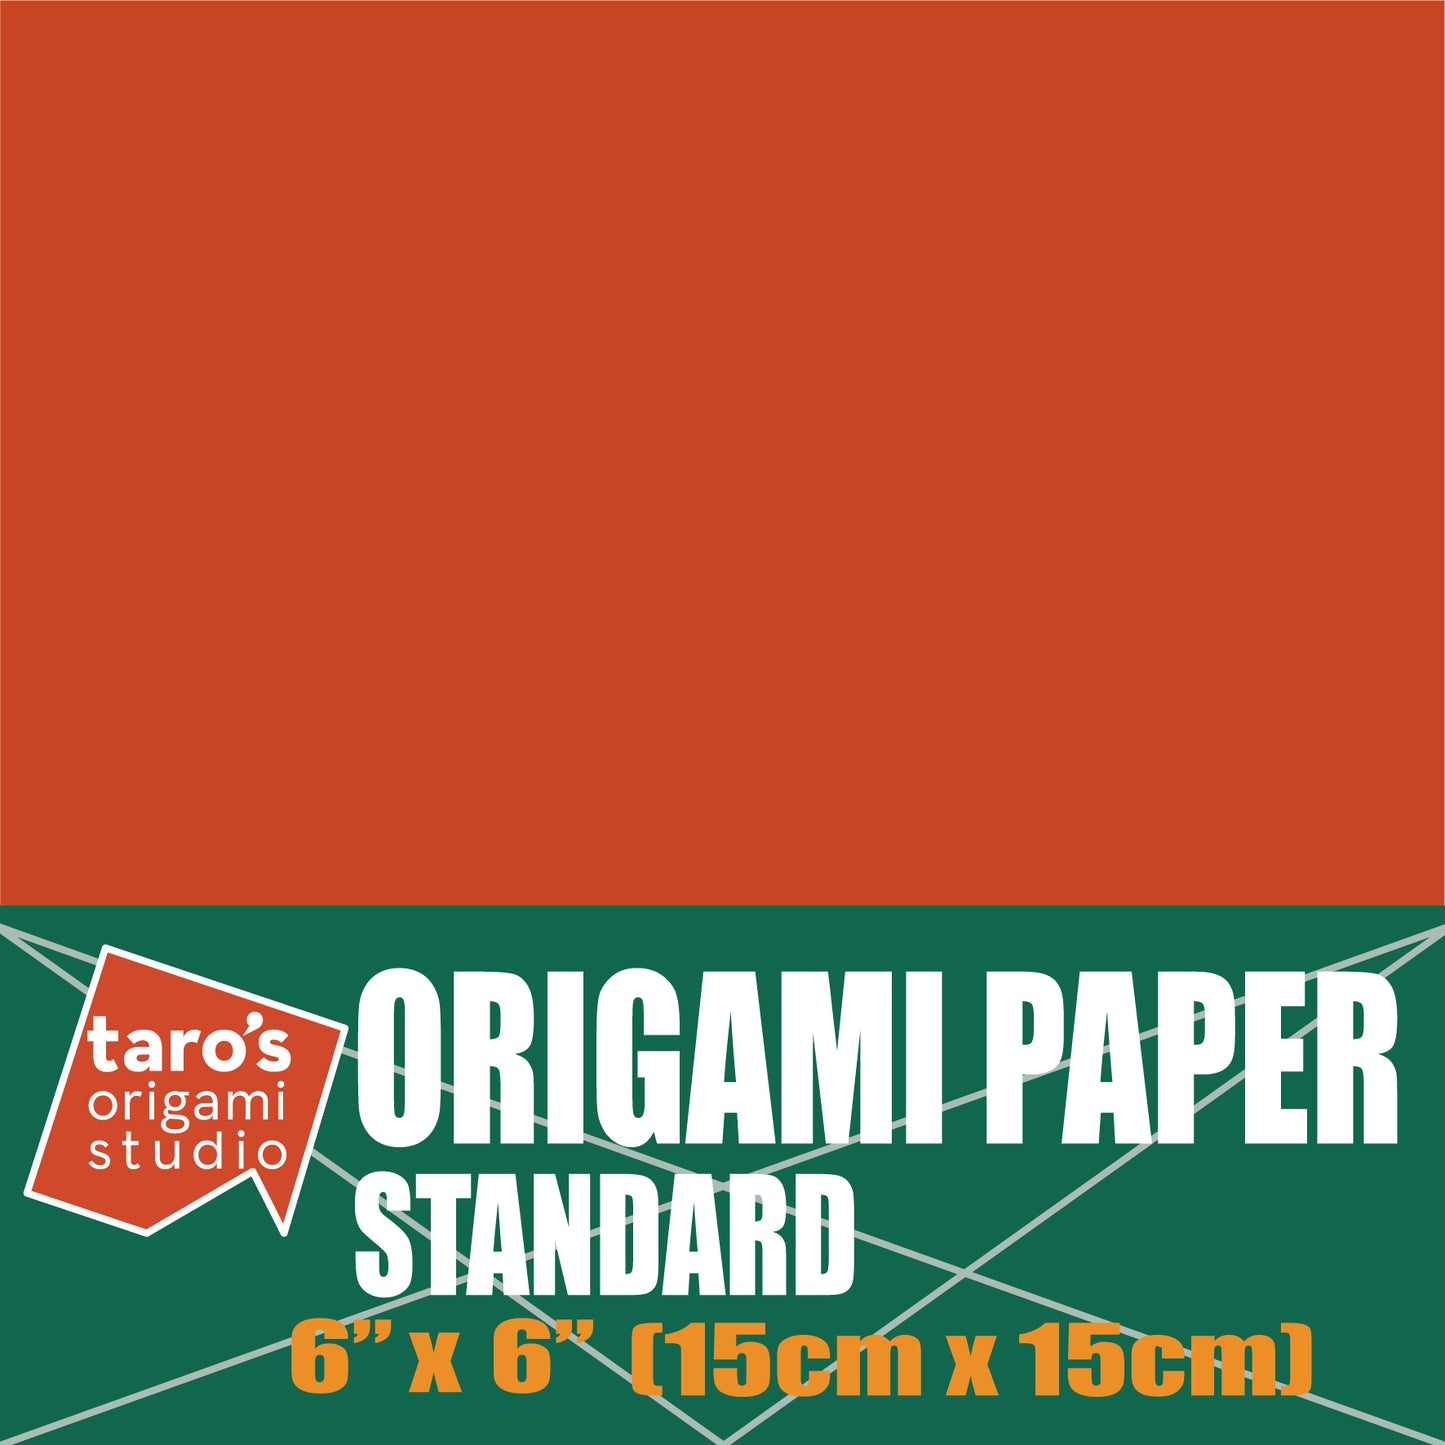 Standard 6 Inch One Sided Single Color (Brick Red) 50 Sheets (All Same Color) Square Easy Fold Premium Japanese Paper for Beginner (Made in Japan)